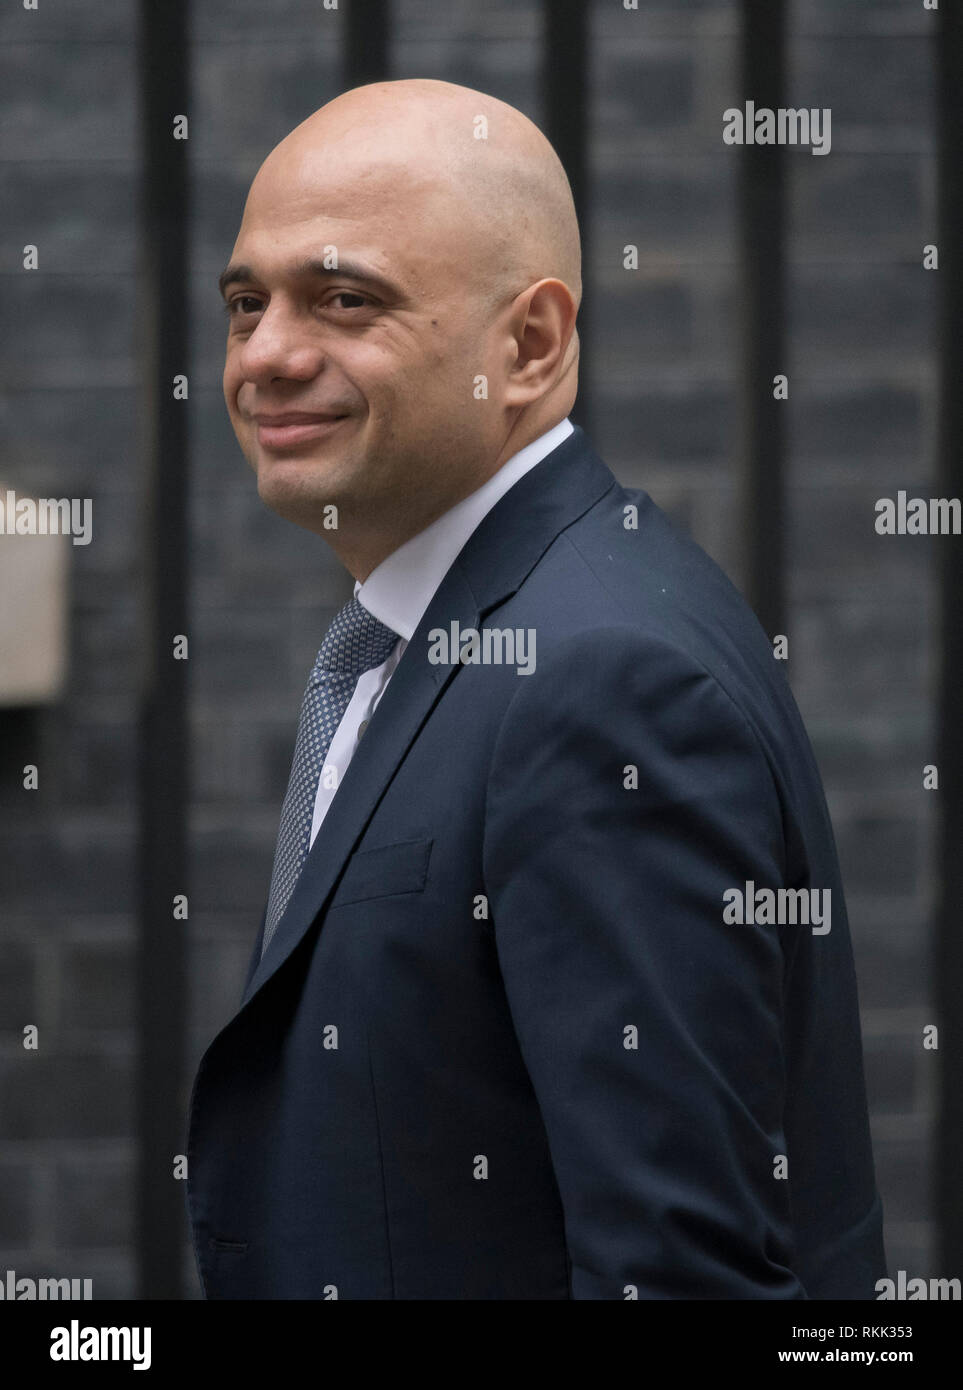 Downing Street, London, UK. 12 February 2019. Government Ministers arrive in Downing Street for weekly cabinet meeting. Sajid Javid, Secretary of State for the Home Department, Home Secretary. Credit: Malcolm Park/Alamy Live News. Stock Photo